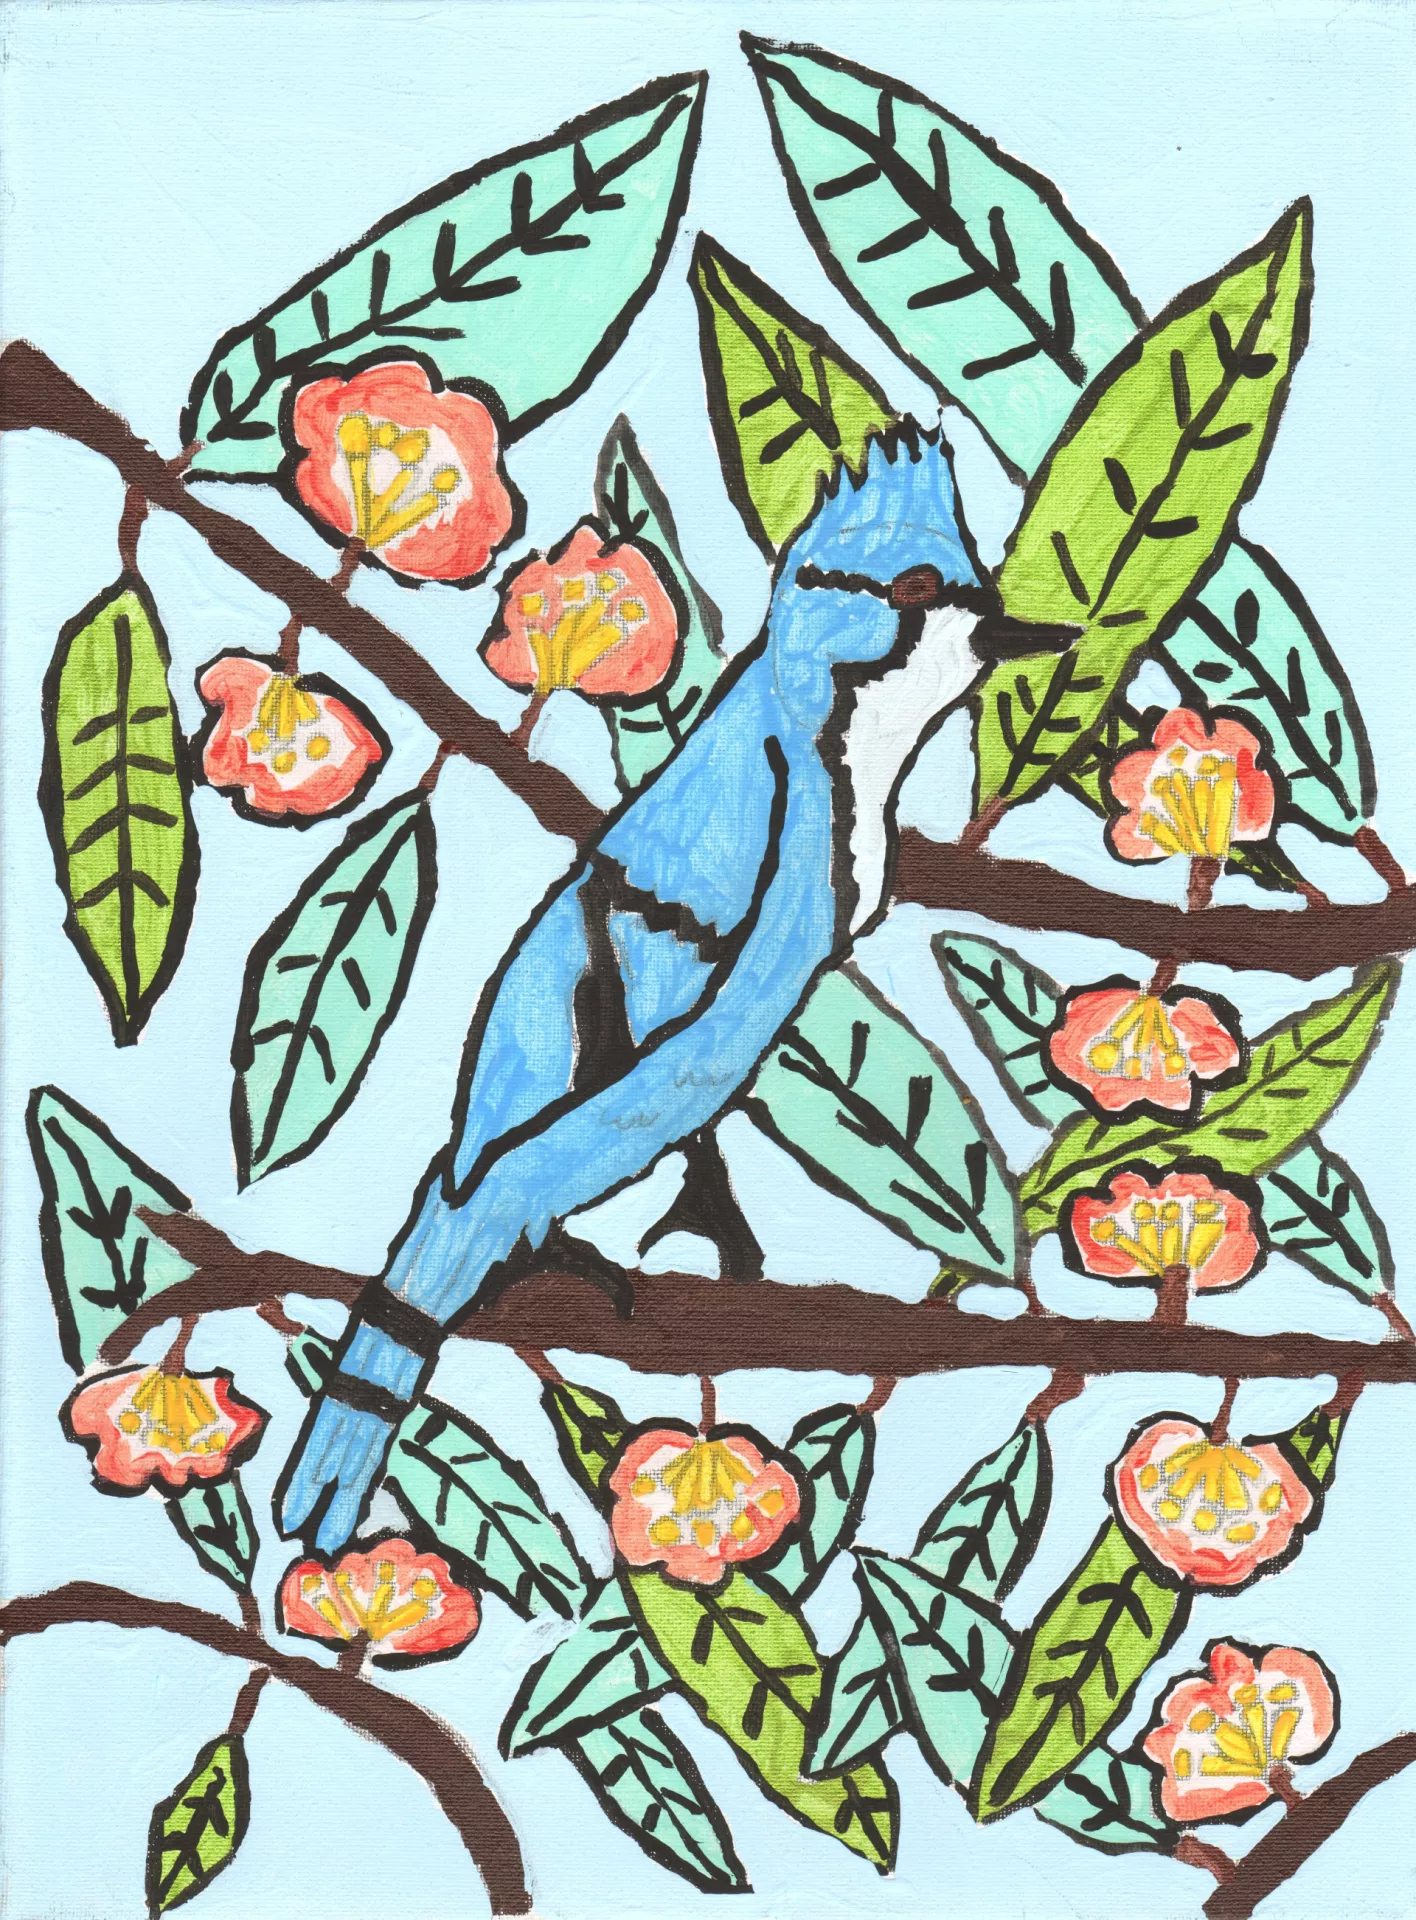 Jennifer Blaauw Blue Jay in the Summertime A blue jay perched on a tree branch and surrounded by green leaves and pink flowers.  Acrylic on canvas, 12" x 16"